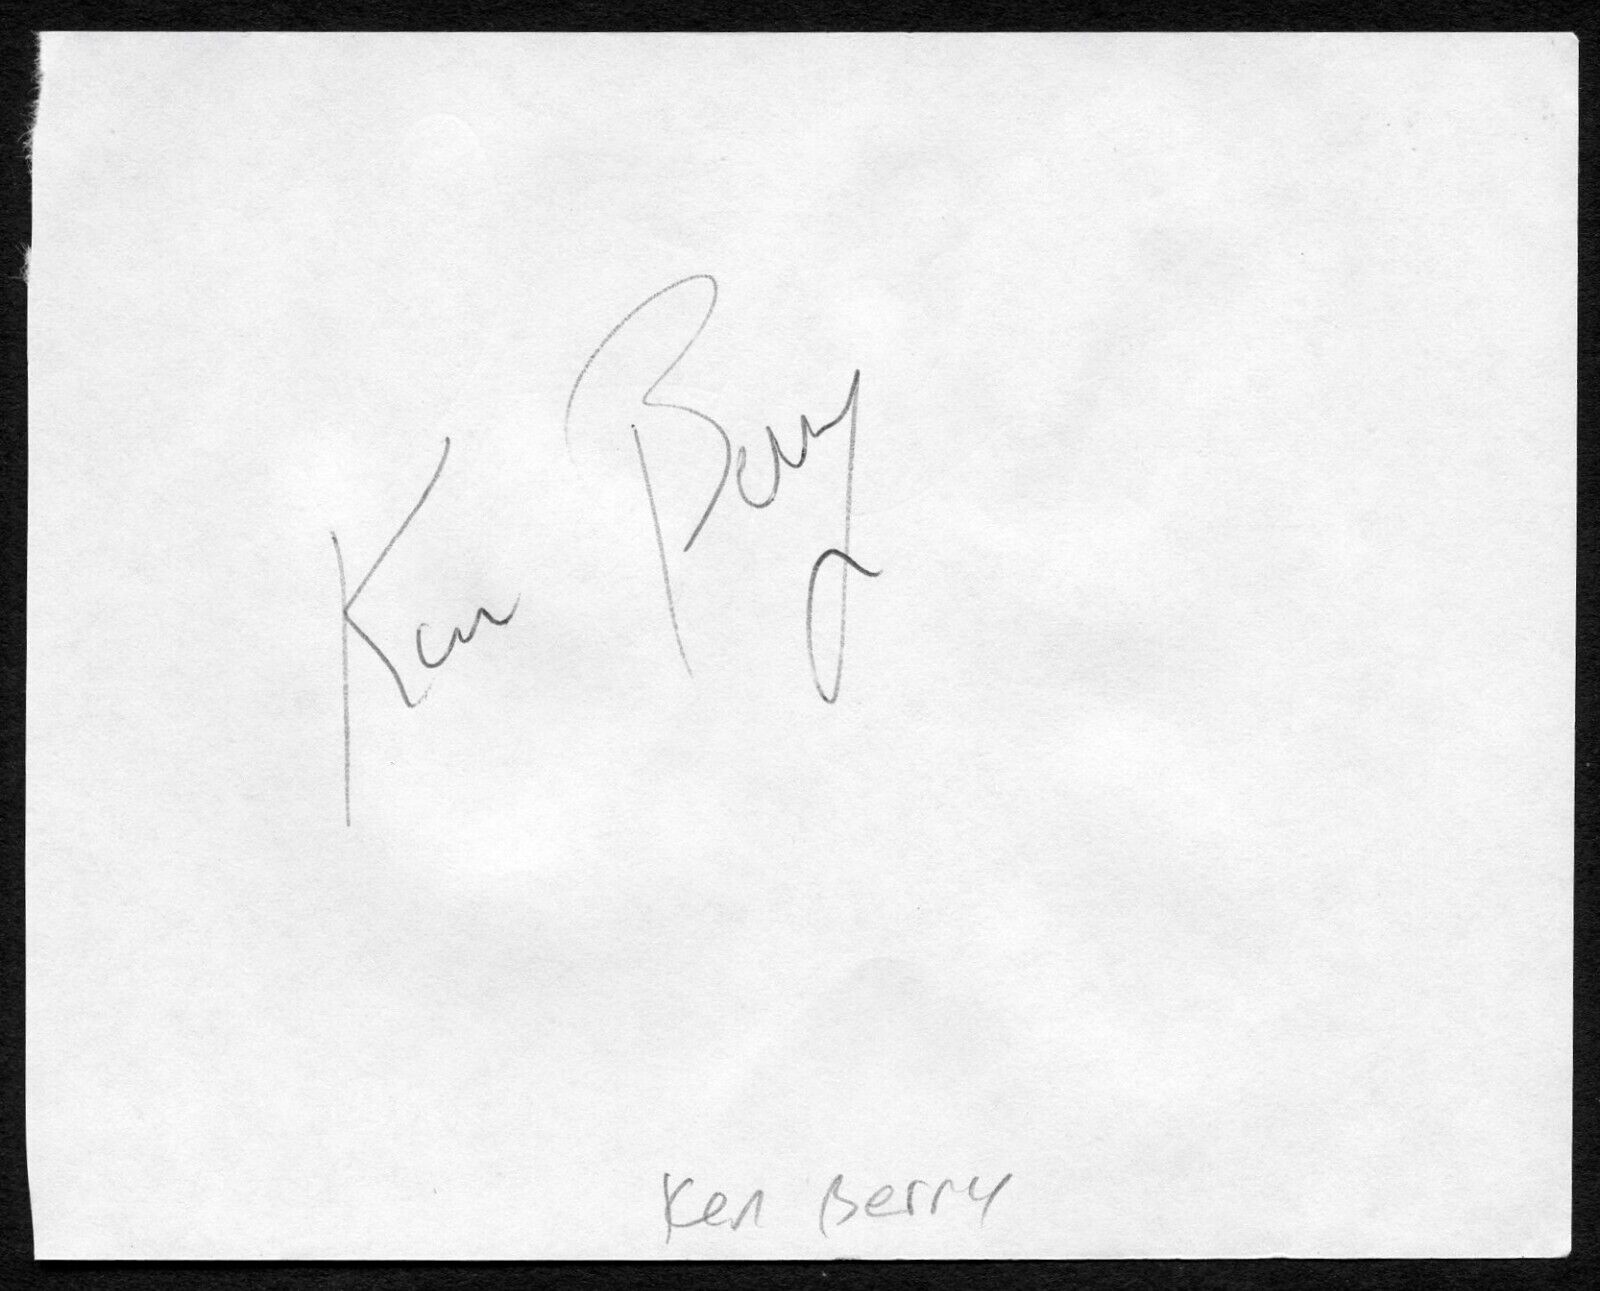 Ken Berry d2018 signed autograph auto 4x5 Album Page Actor in Series F Troop